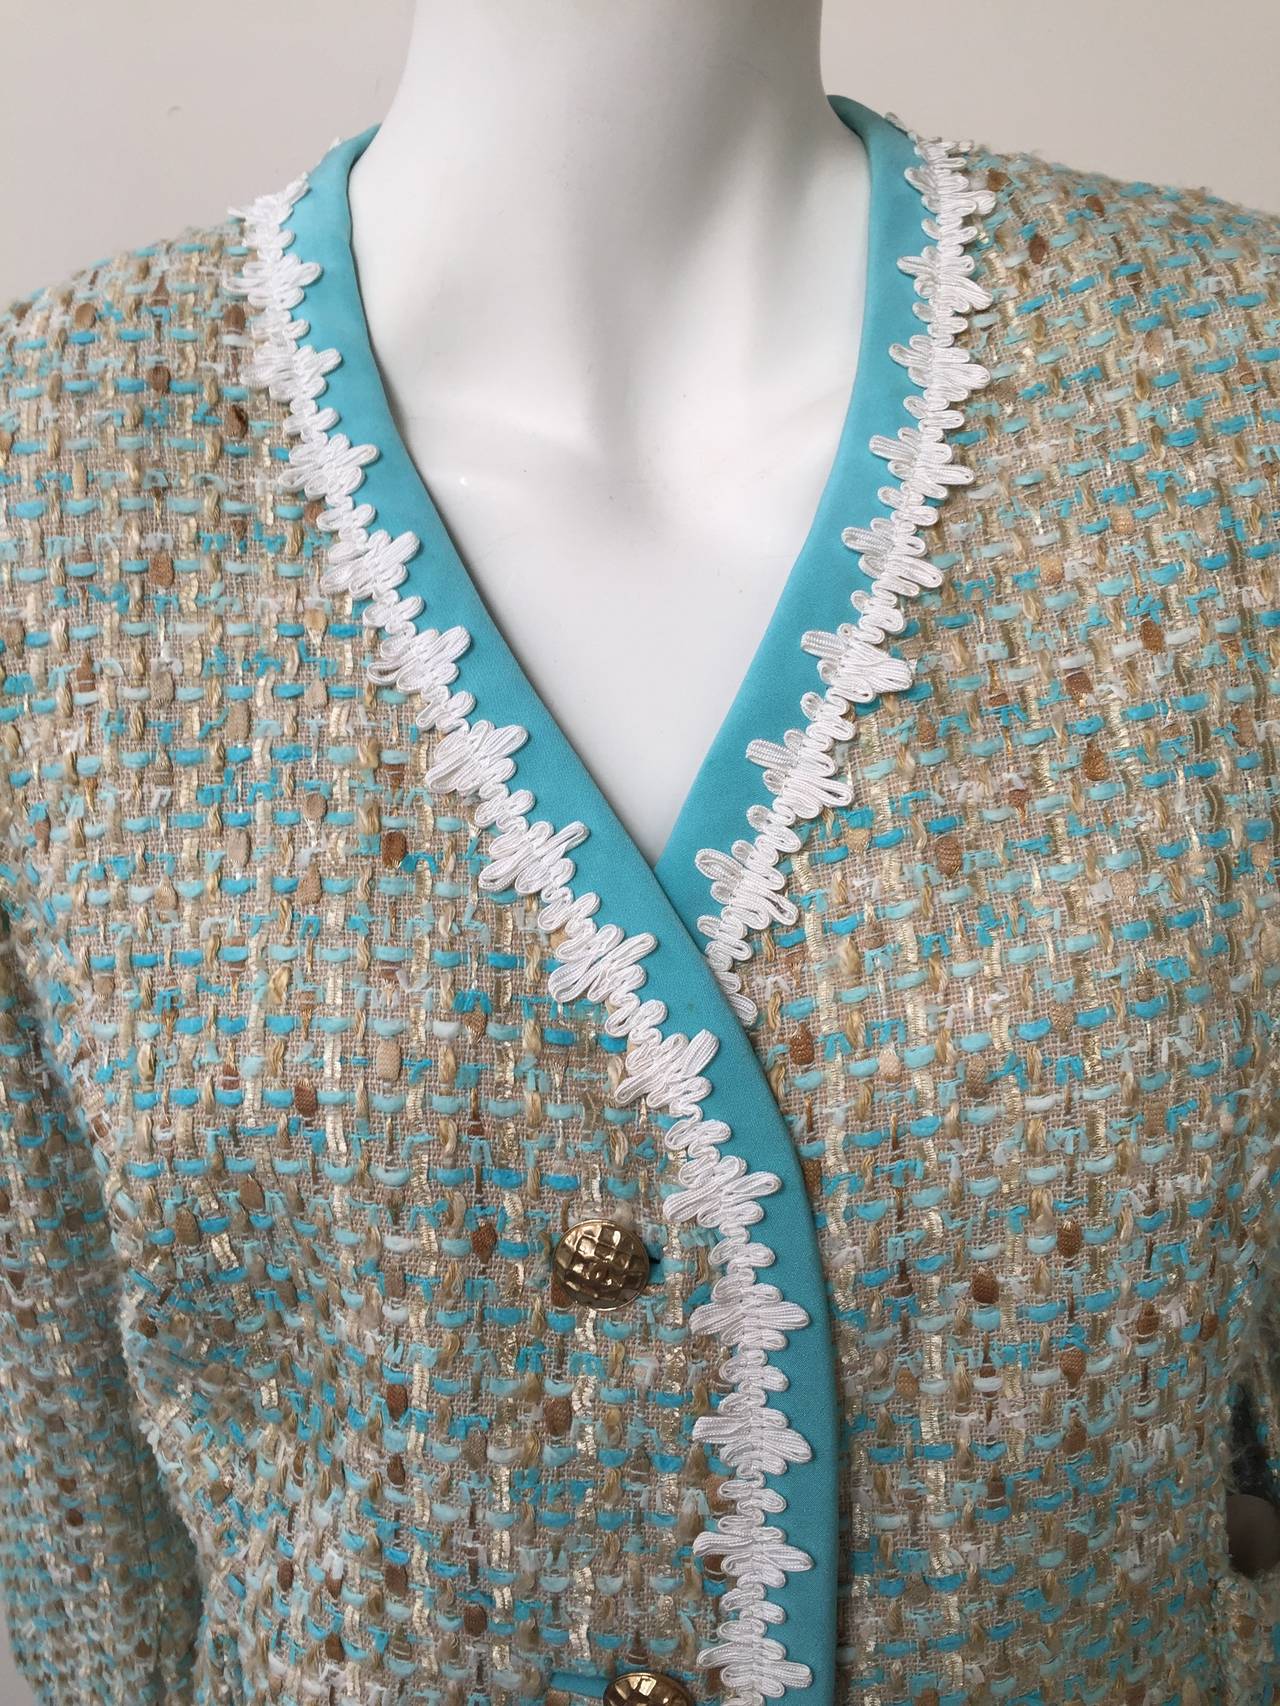 Chanel 1970s sky blue with white trim jacket.  
3 front Chanel logo gold buttons and swoop front pockets. 
Silk lining and in excellent condition.
 Size 38 or size 8 USA but please use measurements provide. 
Measurements are:
40"